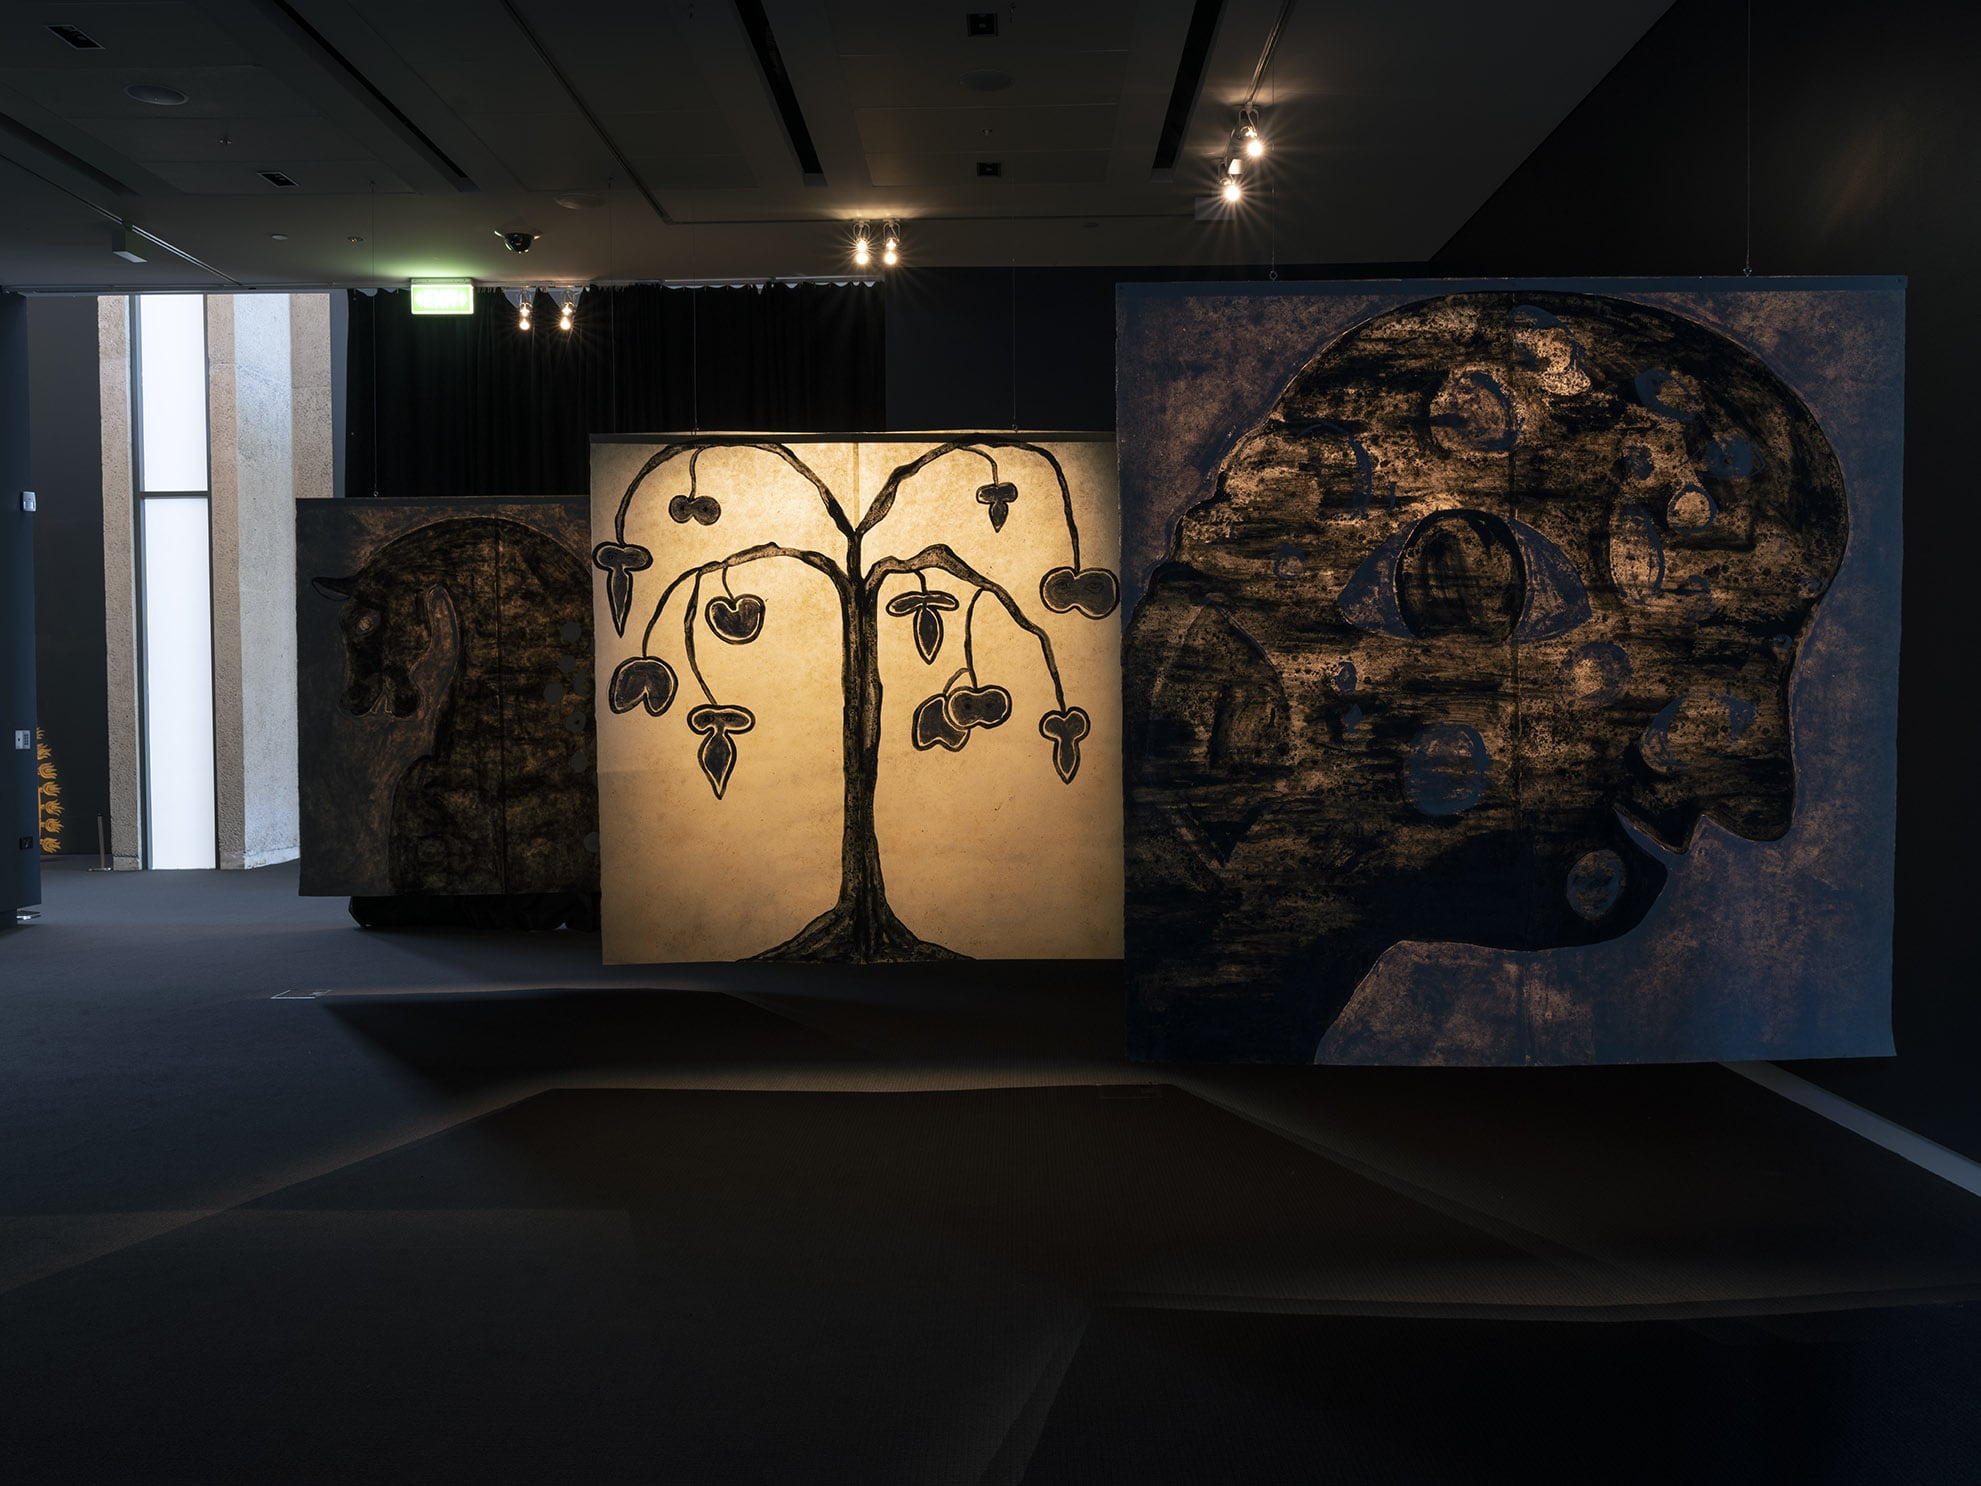 Image 03: Judith Wright, 'Second Sight' (2018–2019), three works on Japanese paper, acrylic and wax, 200 x 200 cm each. Installation view Second Sight, UQ Art Museum. Courtesy of the artist, Fox Jensen, Sydney and Sophie Gannon, Melbourne. Photo: Carl Warner